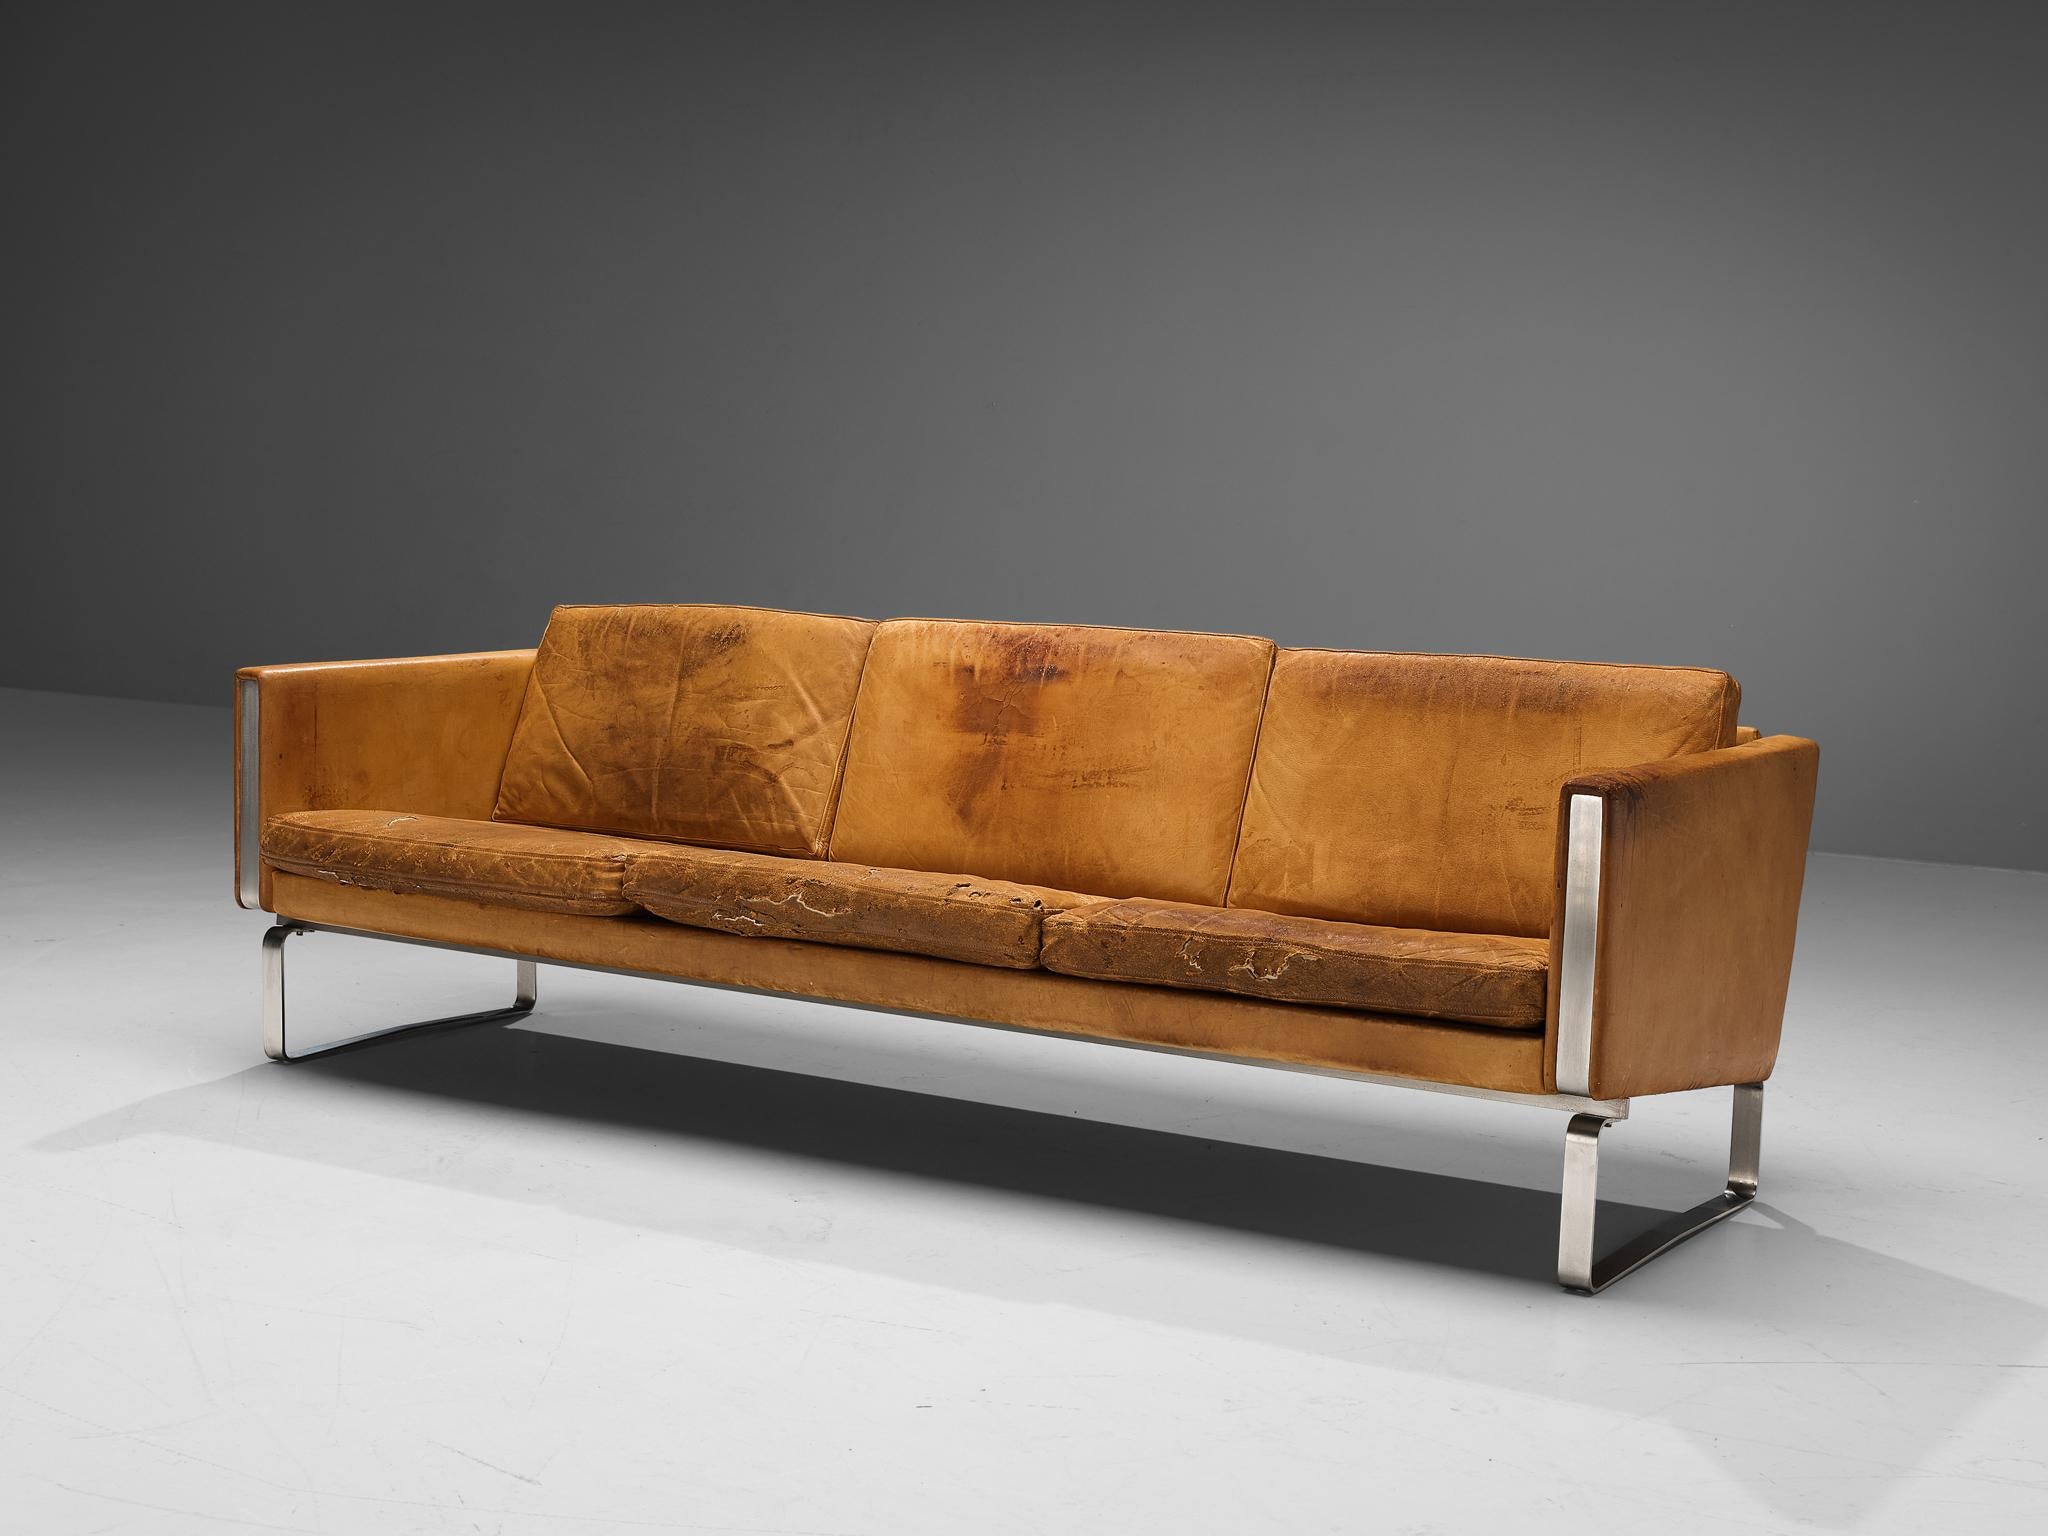 Hans J. Wegner for Carl Hansen & Søn, sofa, leather, chrome, Denmark, 1970s

The CH103 sofa by Hans J. Wegner for Carl Hansen & Søn is a modern 3-seat sofa ideal for contemporary interiors. This cognac leather sofa with a square steel base on each